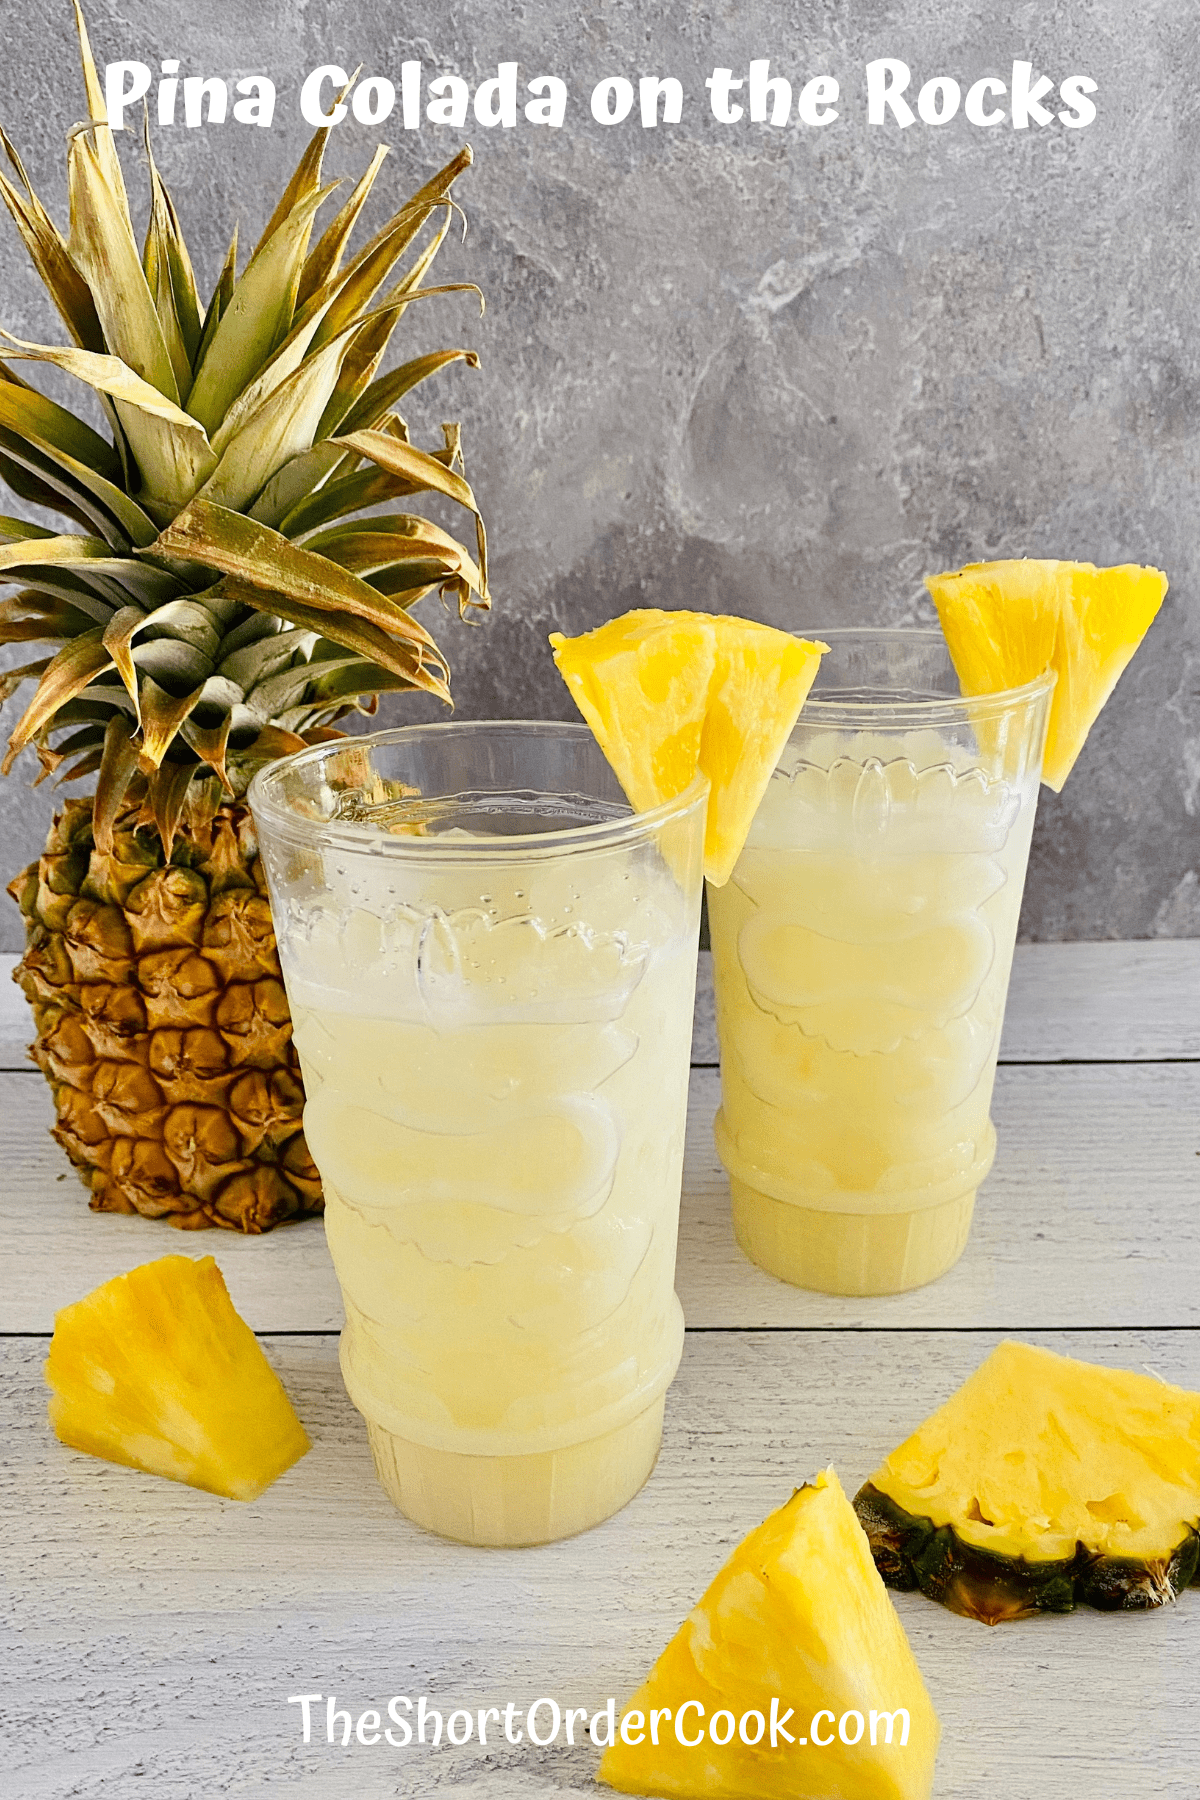 Two glasses filled with pina colada on the rocks ready to drink.